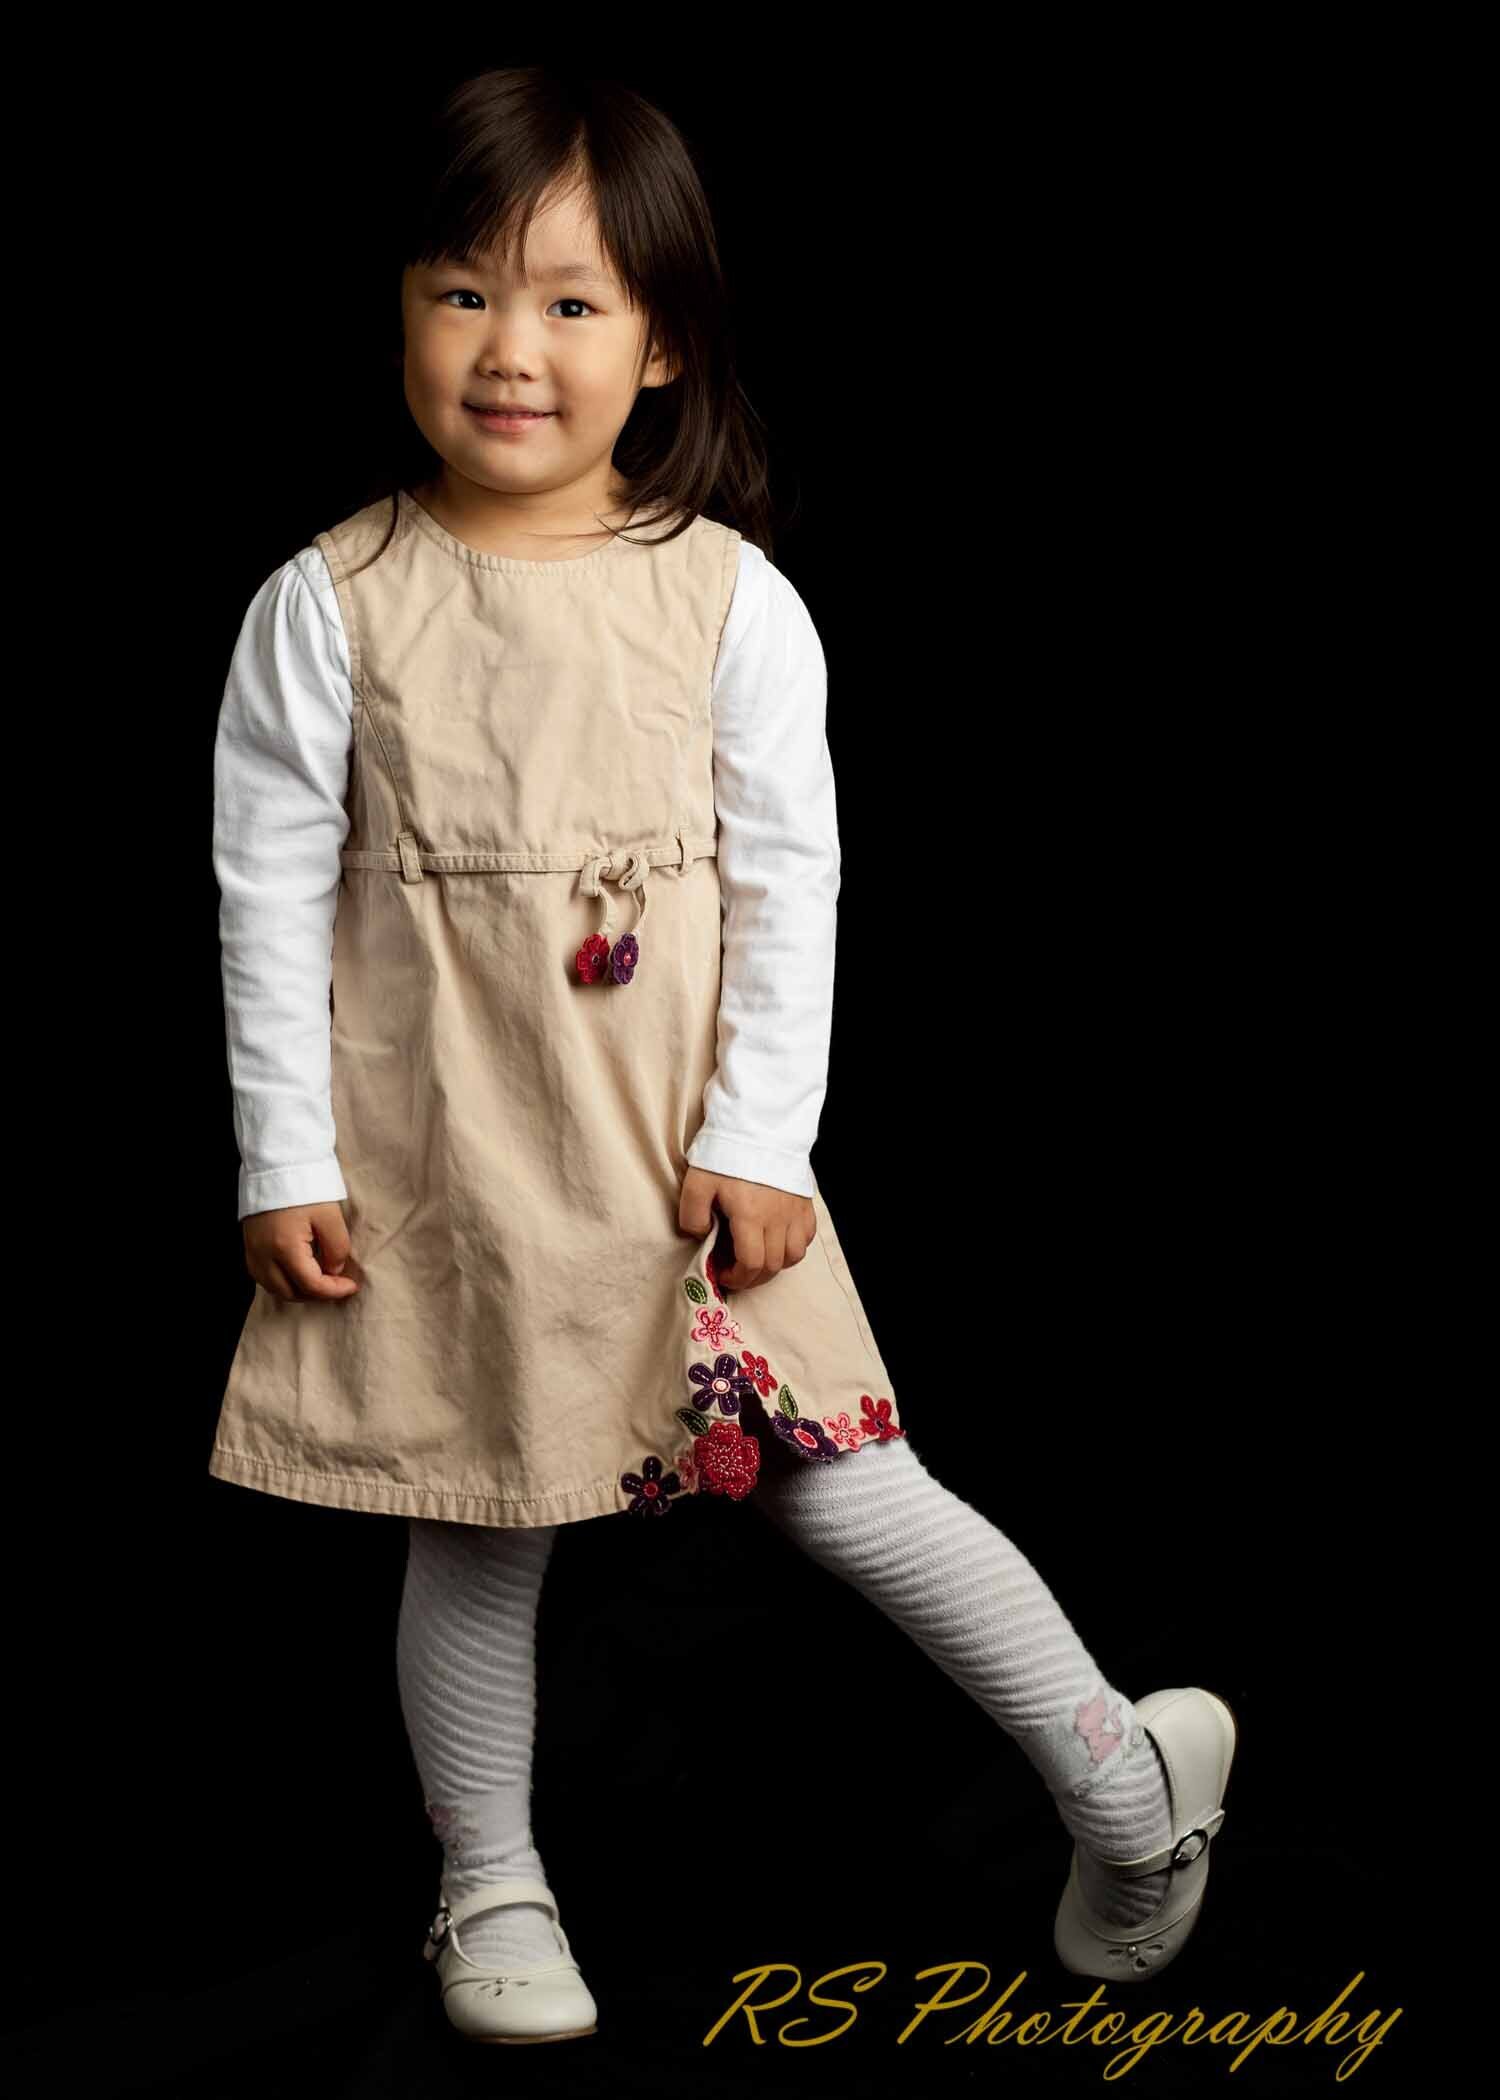 Young girl posing in a studio shoot with Ron Schroll Photography in Charlotte, NC